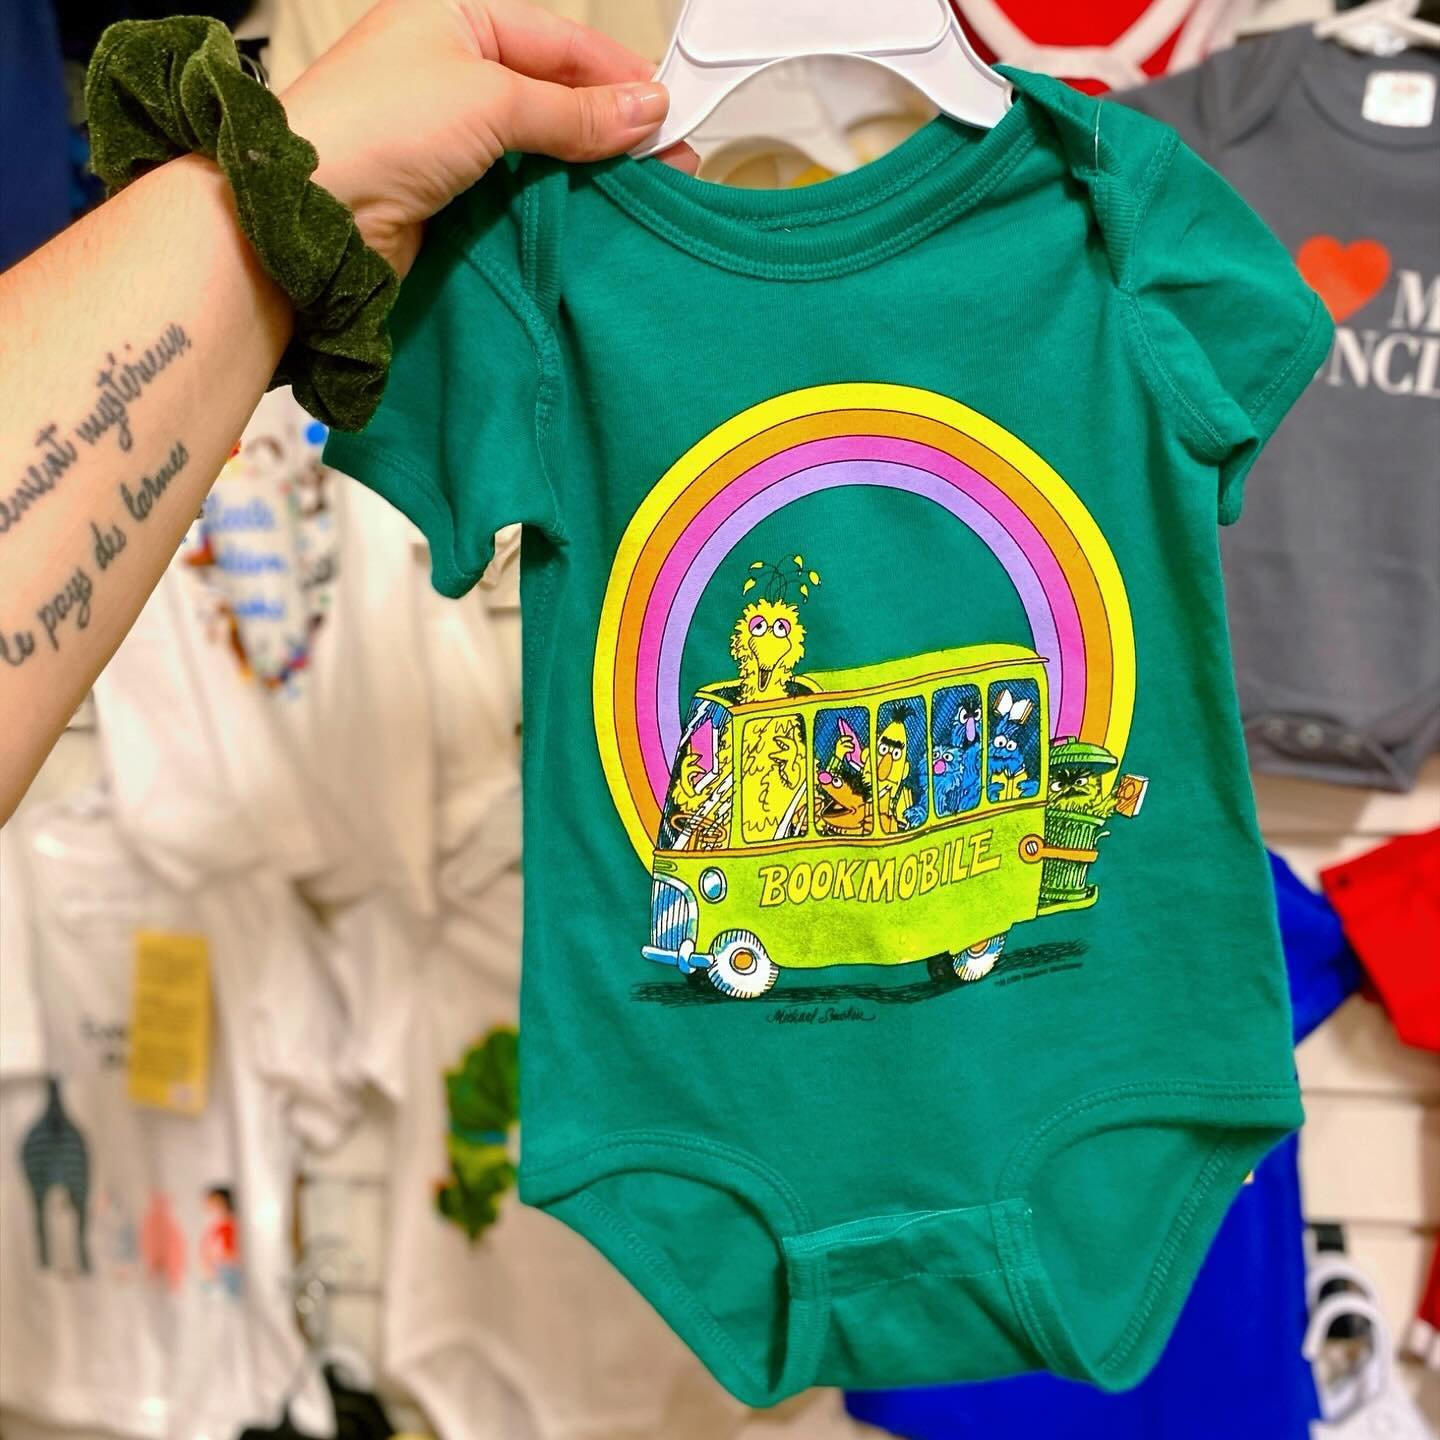 As you probably know, we have an awesome collection of shirts to shop from here at Kards. But did you know we also carry some options for kids? We&rsquo;ve got these styles from @outofprint and more available as onesies or kid-size t-shirts!